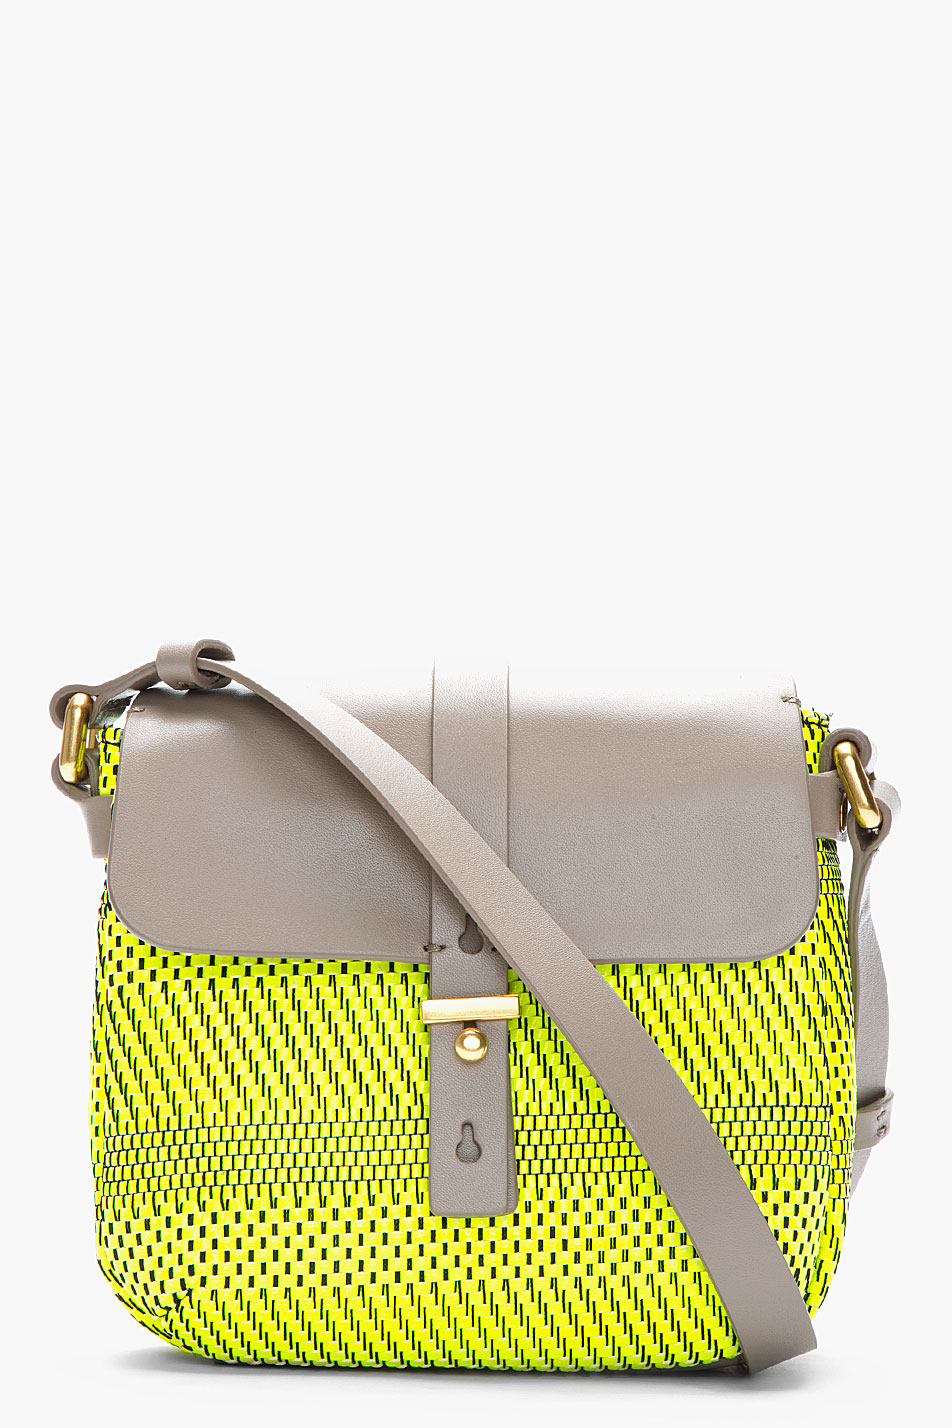 Marc By Marc Jacobs Neon Yellow Weavy Leather Isabelle Werdie Shoulder Bag in Yellow | Lyst